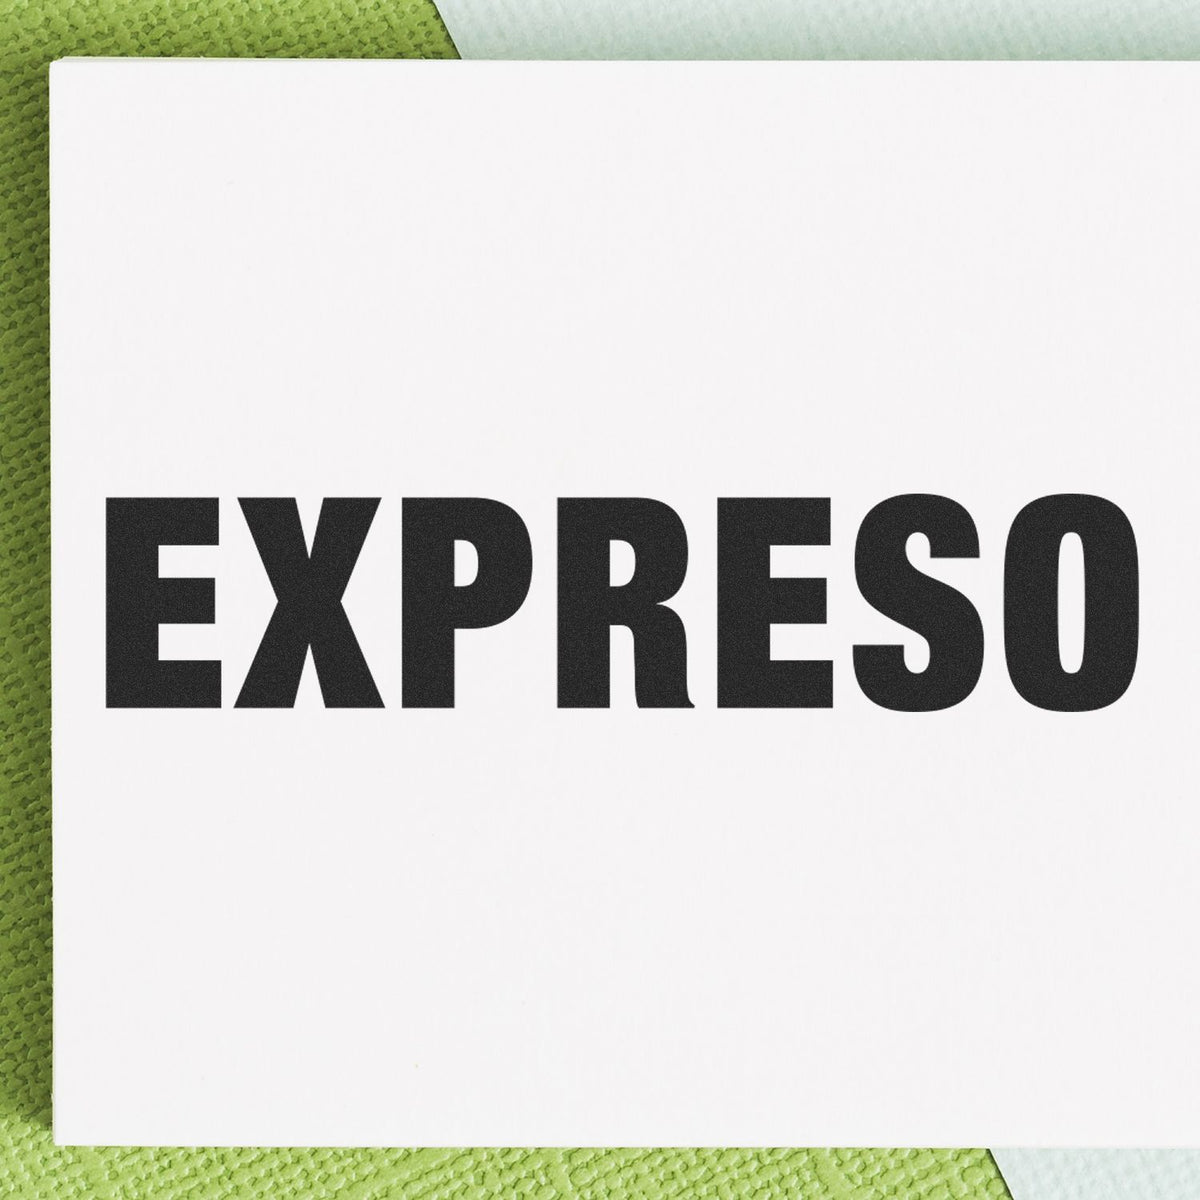 Expreso Rubber Stamp Lifestyle Photo